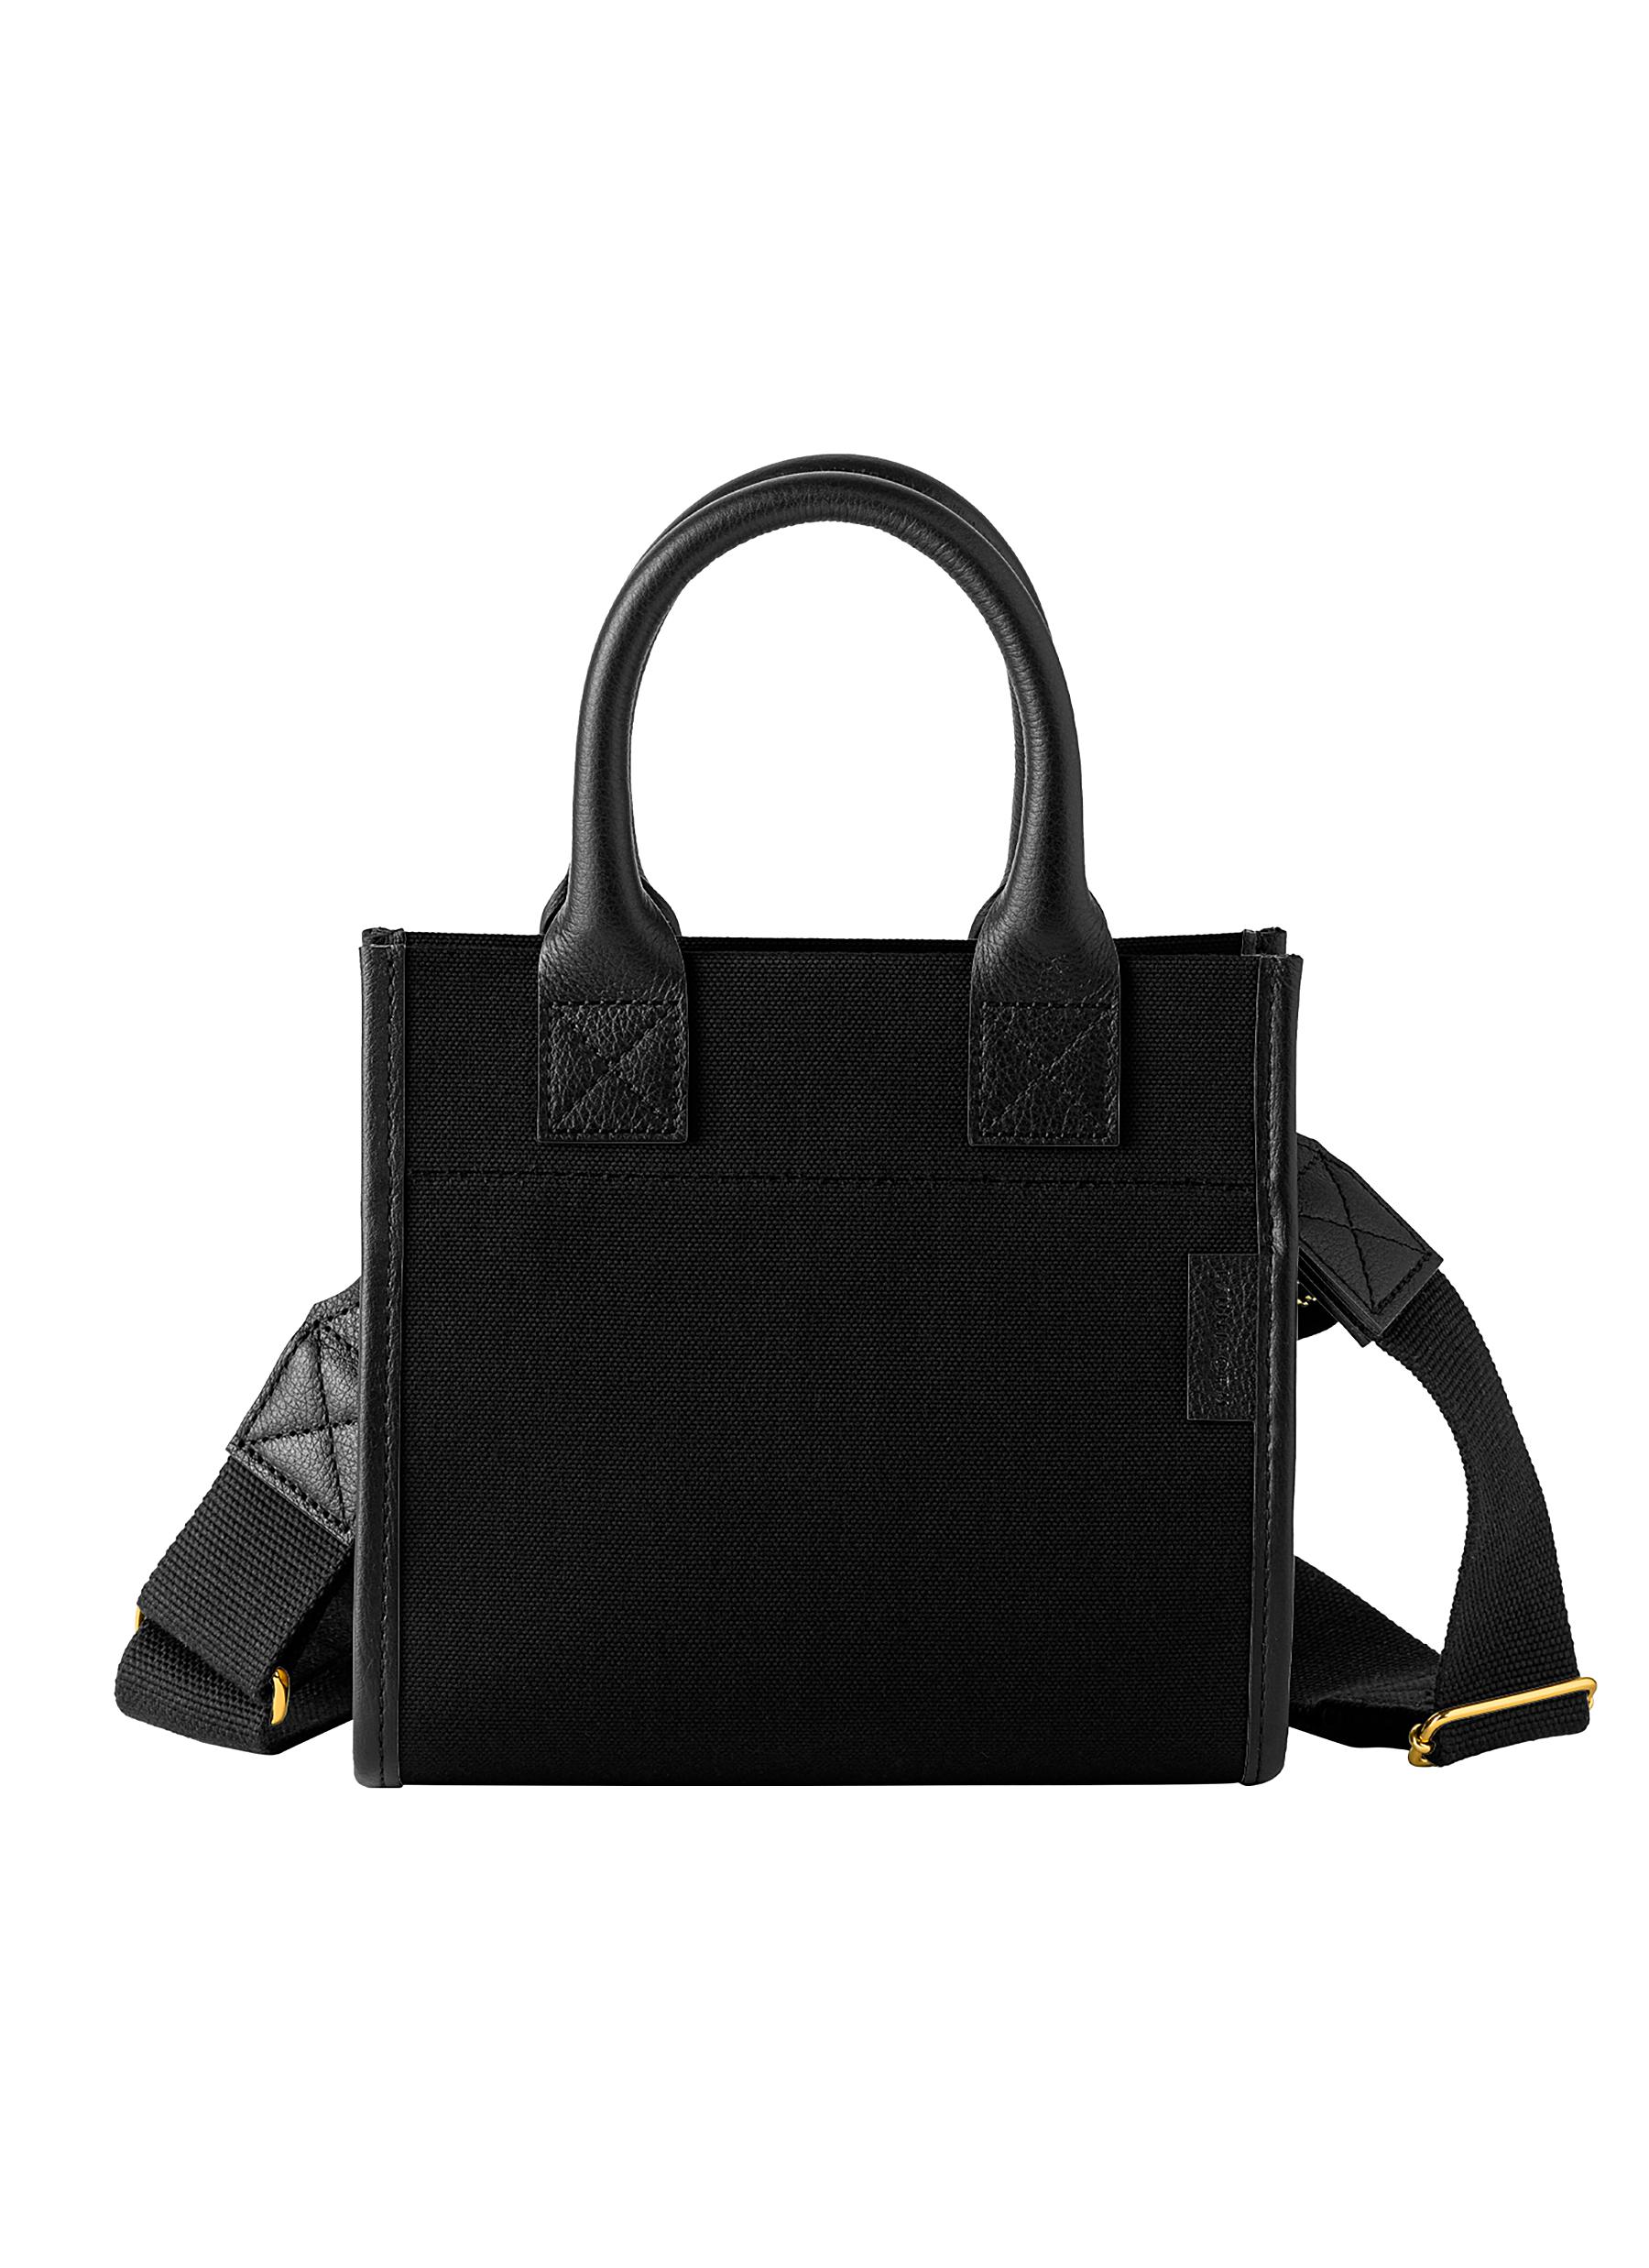 The Miniature Carry-All Tote Bag N°183